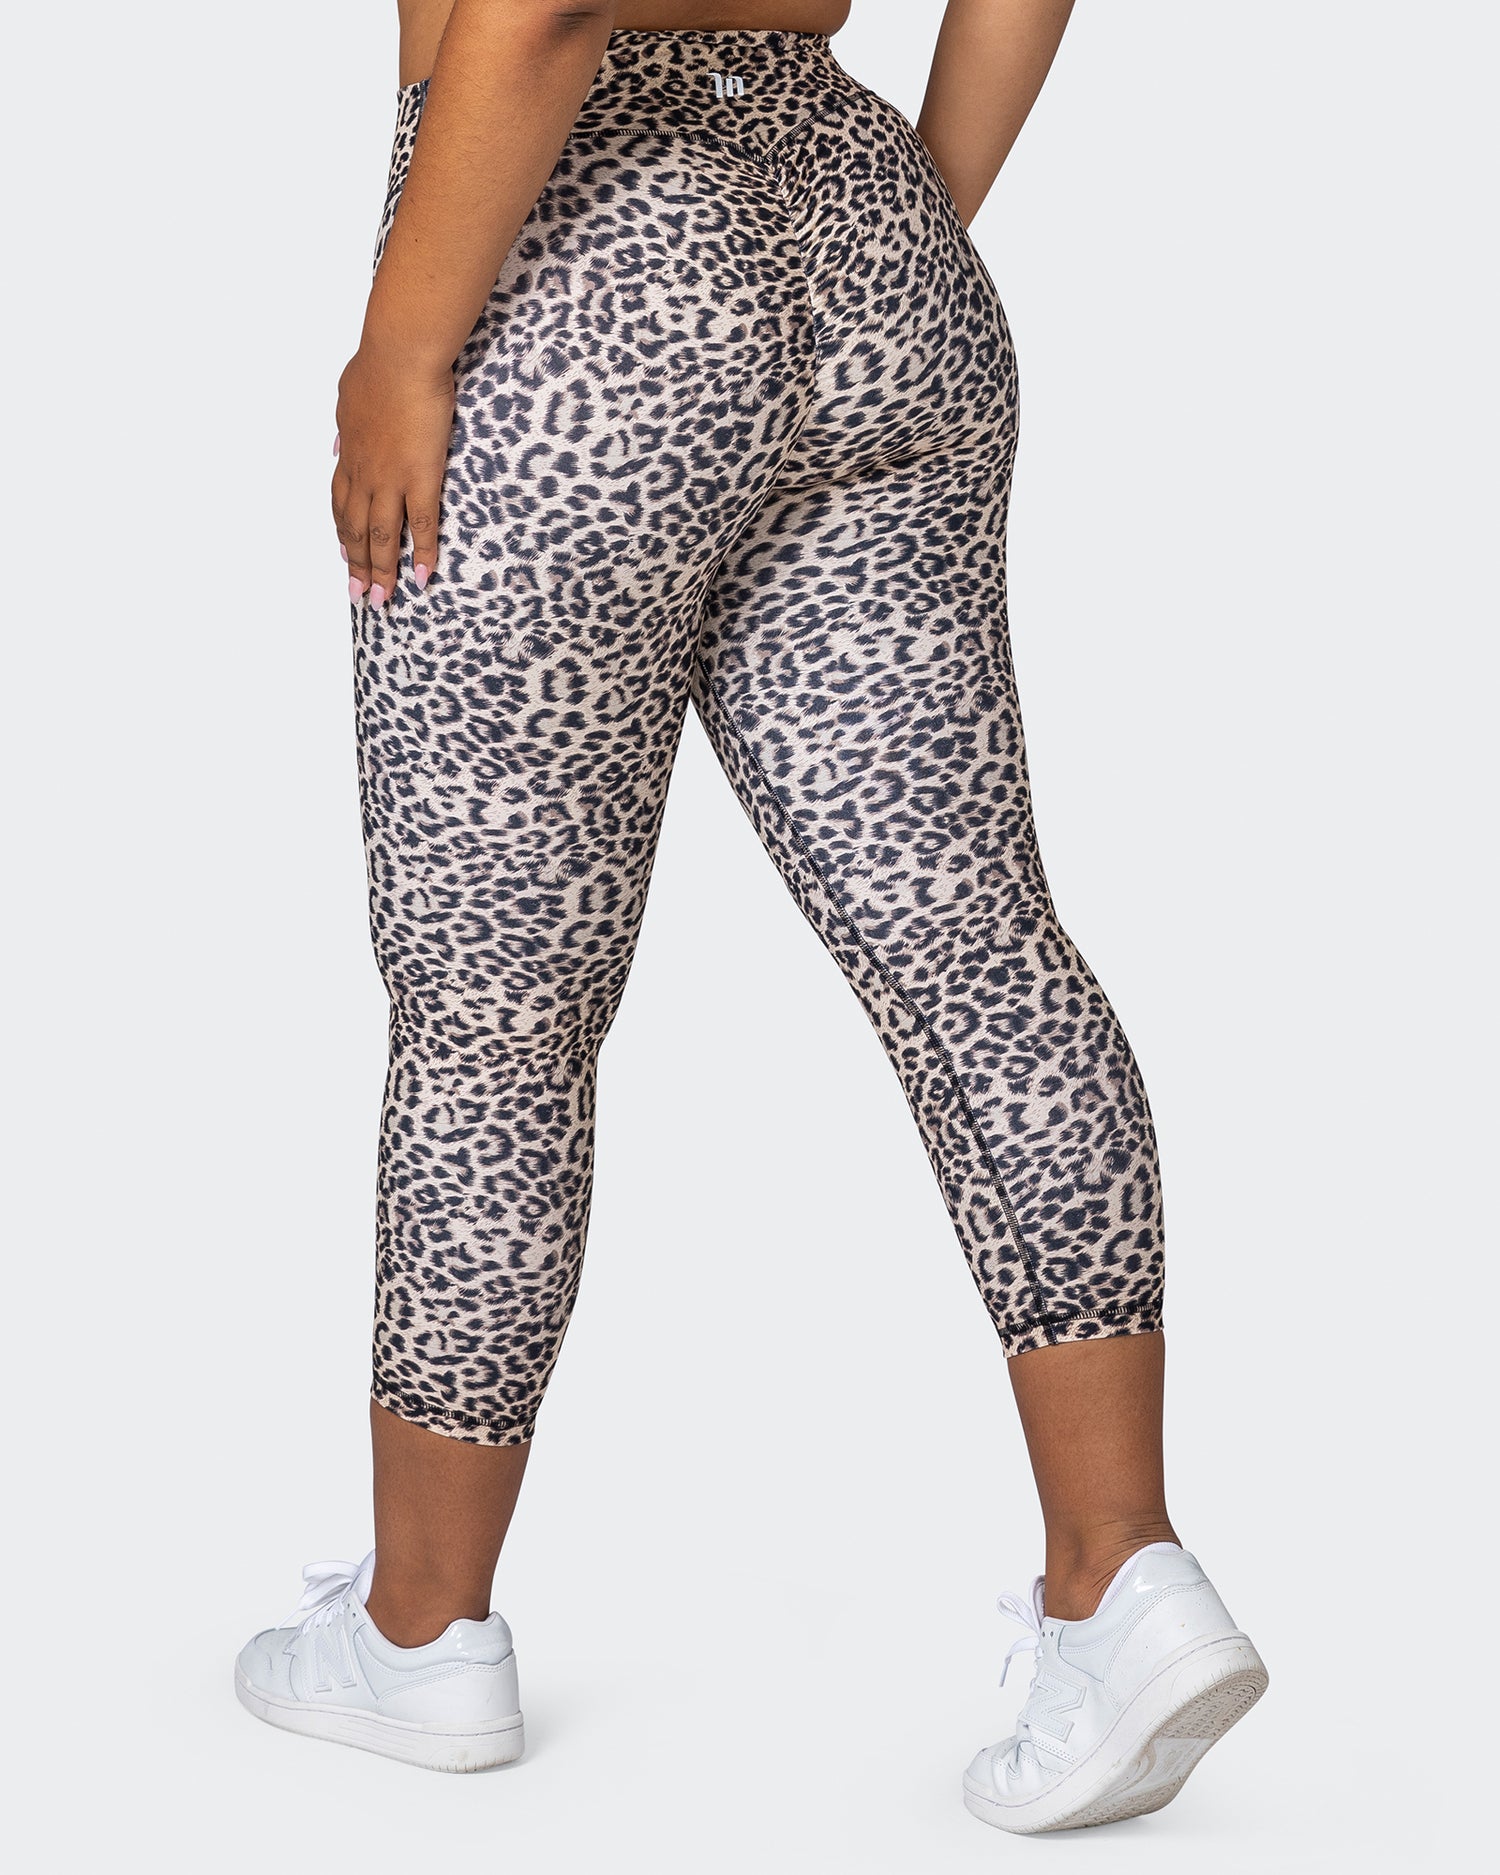 Signature Scrunch 7/8 Leggings - Yellow Leopard - Muscle Nation